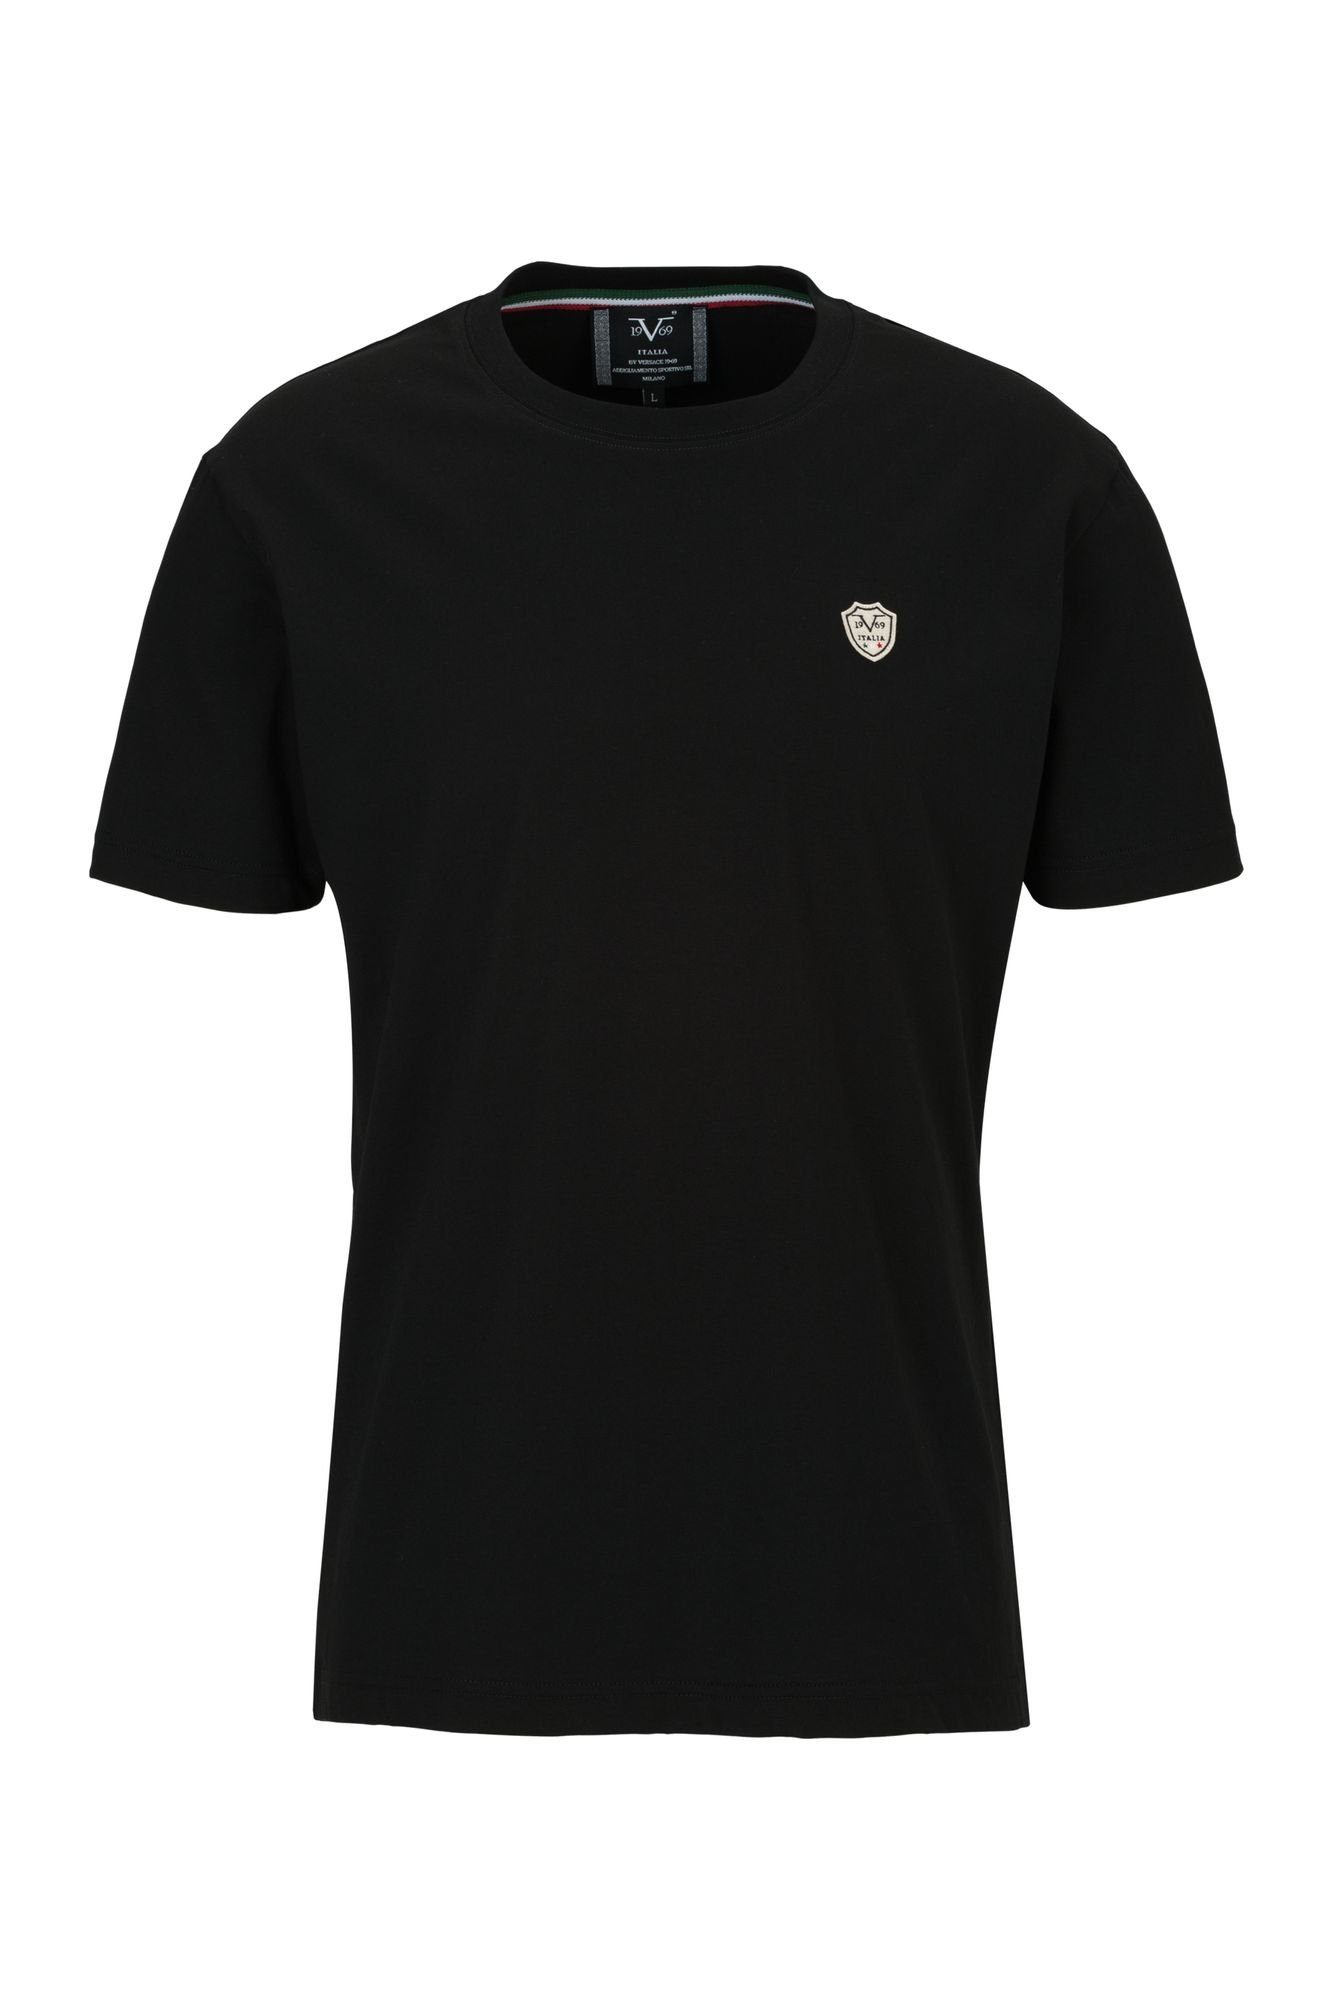 19V69 Italia by Versace T-Shirt Injection BLACK